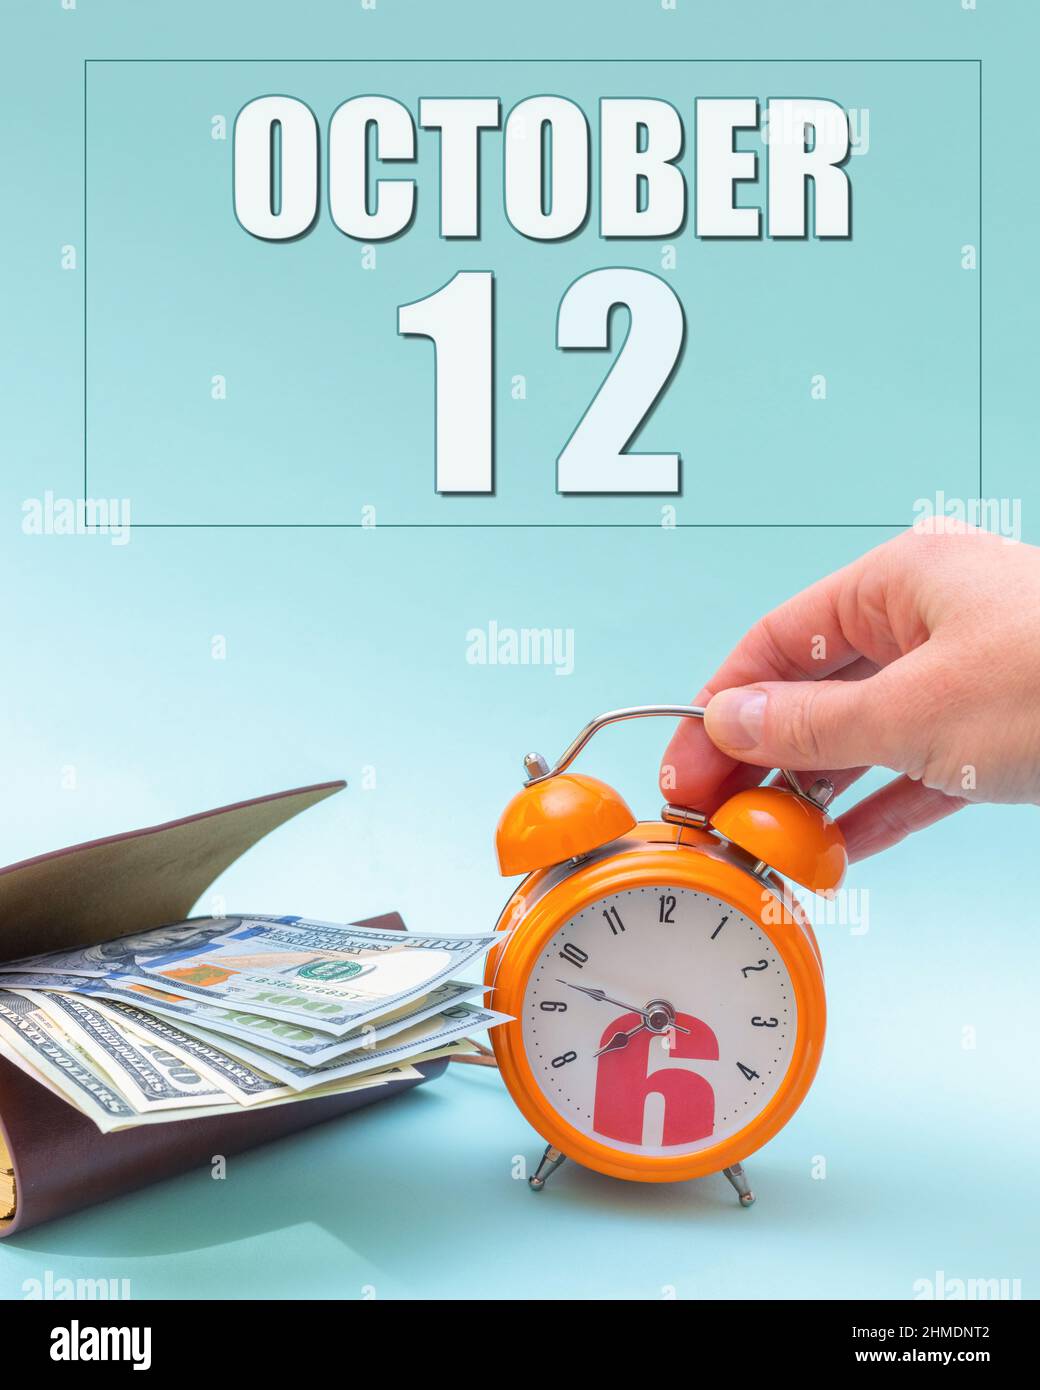 October 12th. Hand holding an orange alarm clock, a wallet with cash and a calendar date. Day 12 of month. Business planning. Time is money. Tax time. Stock Photo